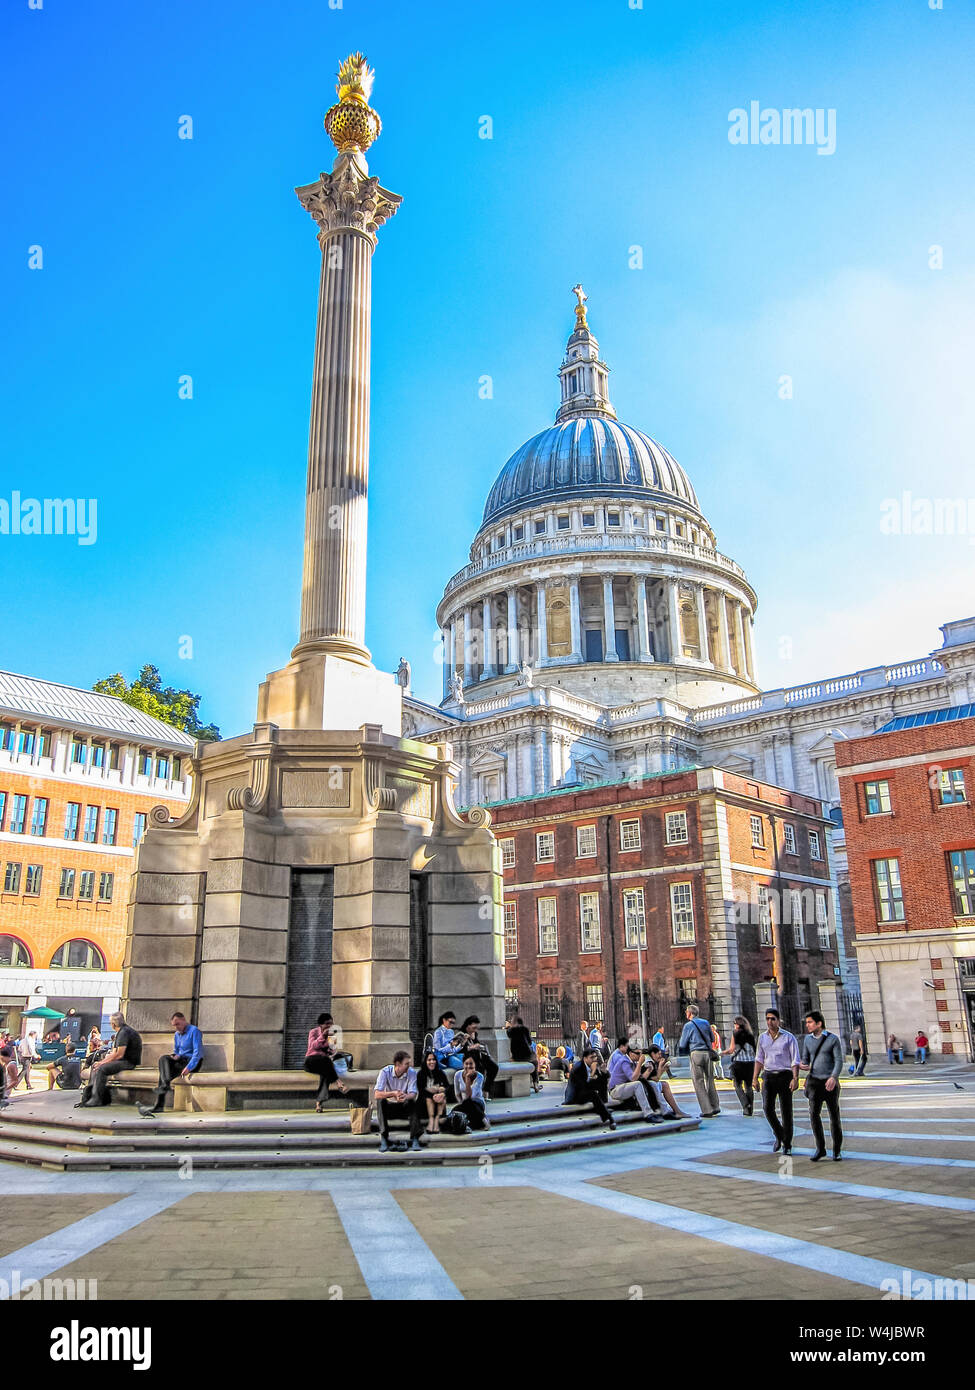 Paternoster Square mit Blick auf die St. Paul's Kathedrale. London, England. Stockfoto